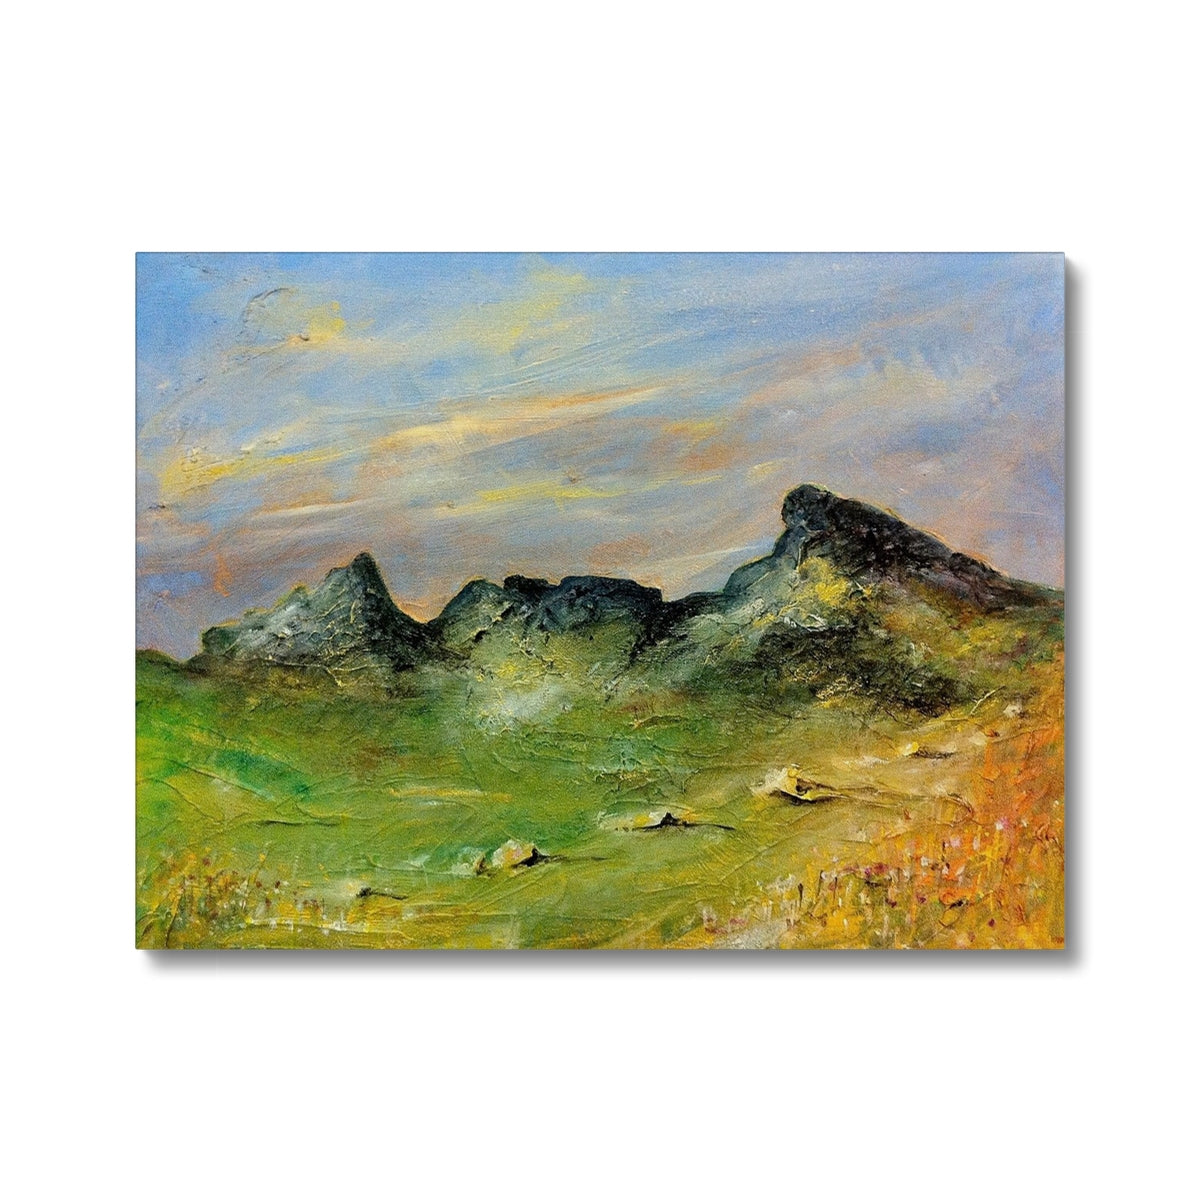 The Cobbler Painting | Canvas From Scotland-Contemporary Stretched Canvas Prints-Scottish Lochs & Mountains Art Gallery-24"x18"-Paintings, Prints, Homeware, Art Gifts From Scotland By Scottish Artist Kevin Hunter